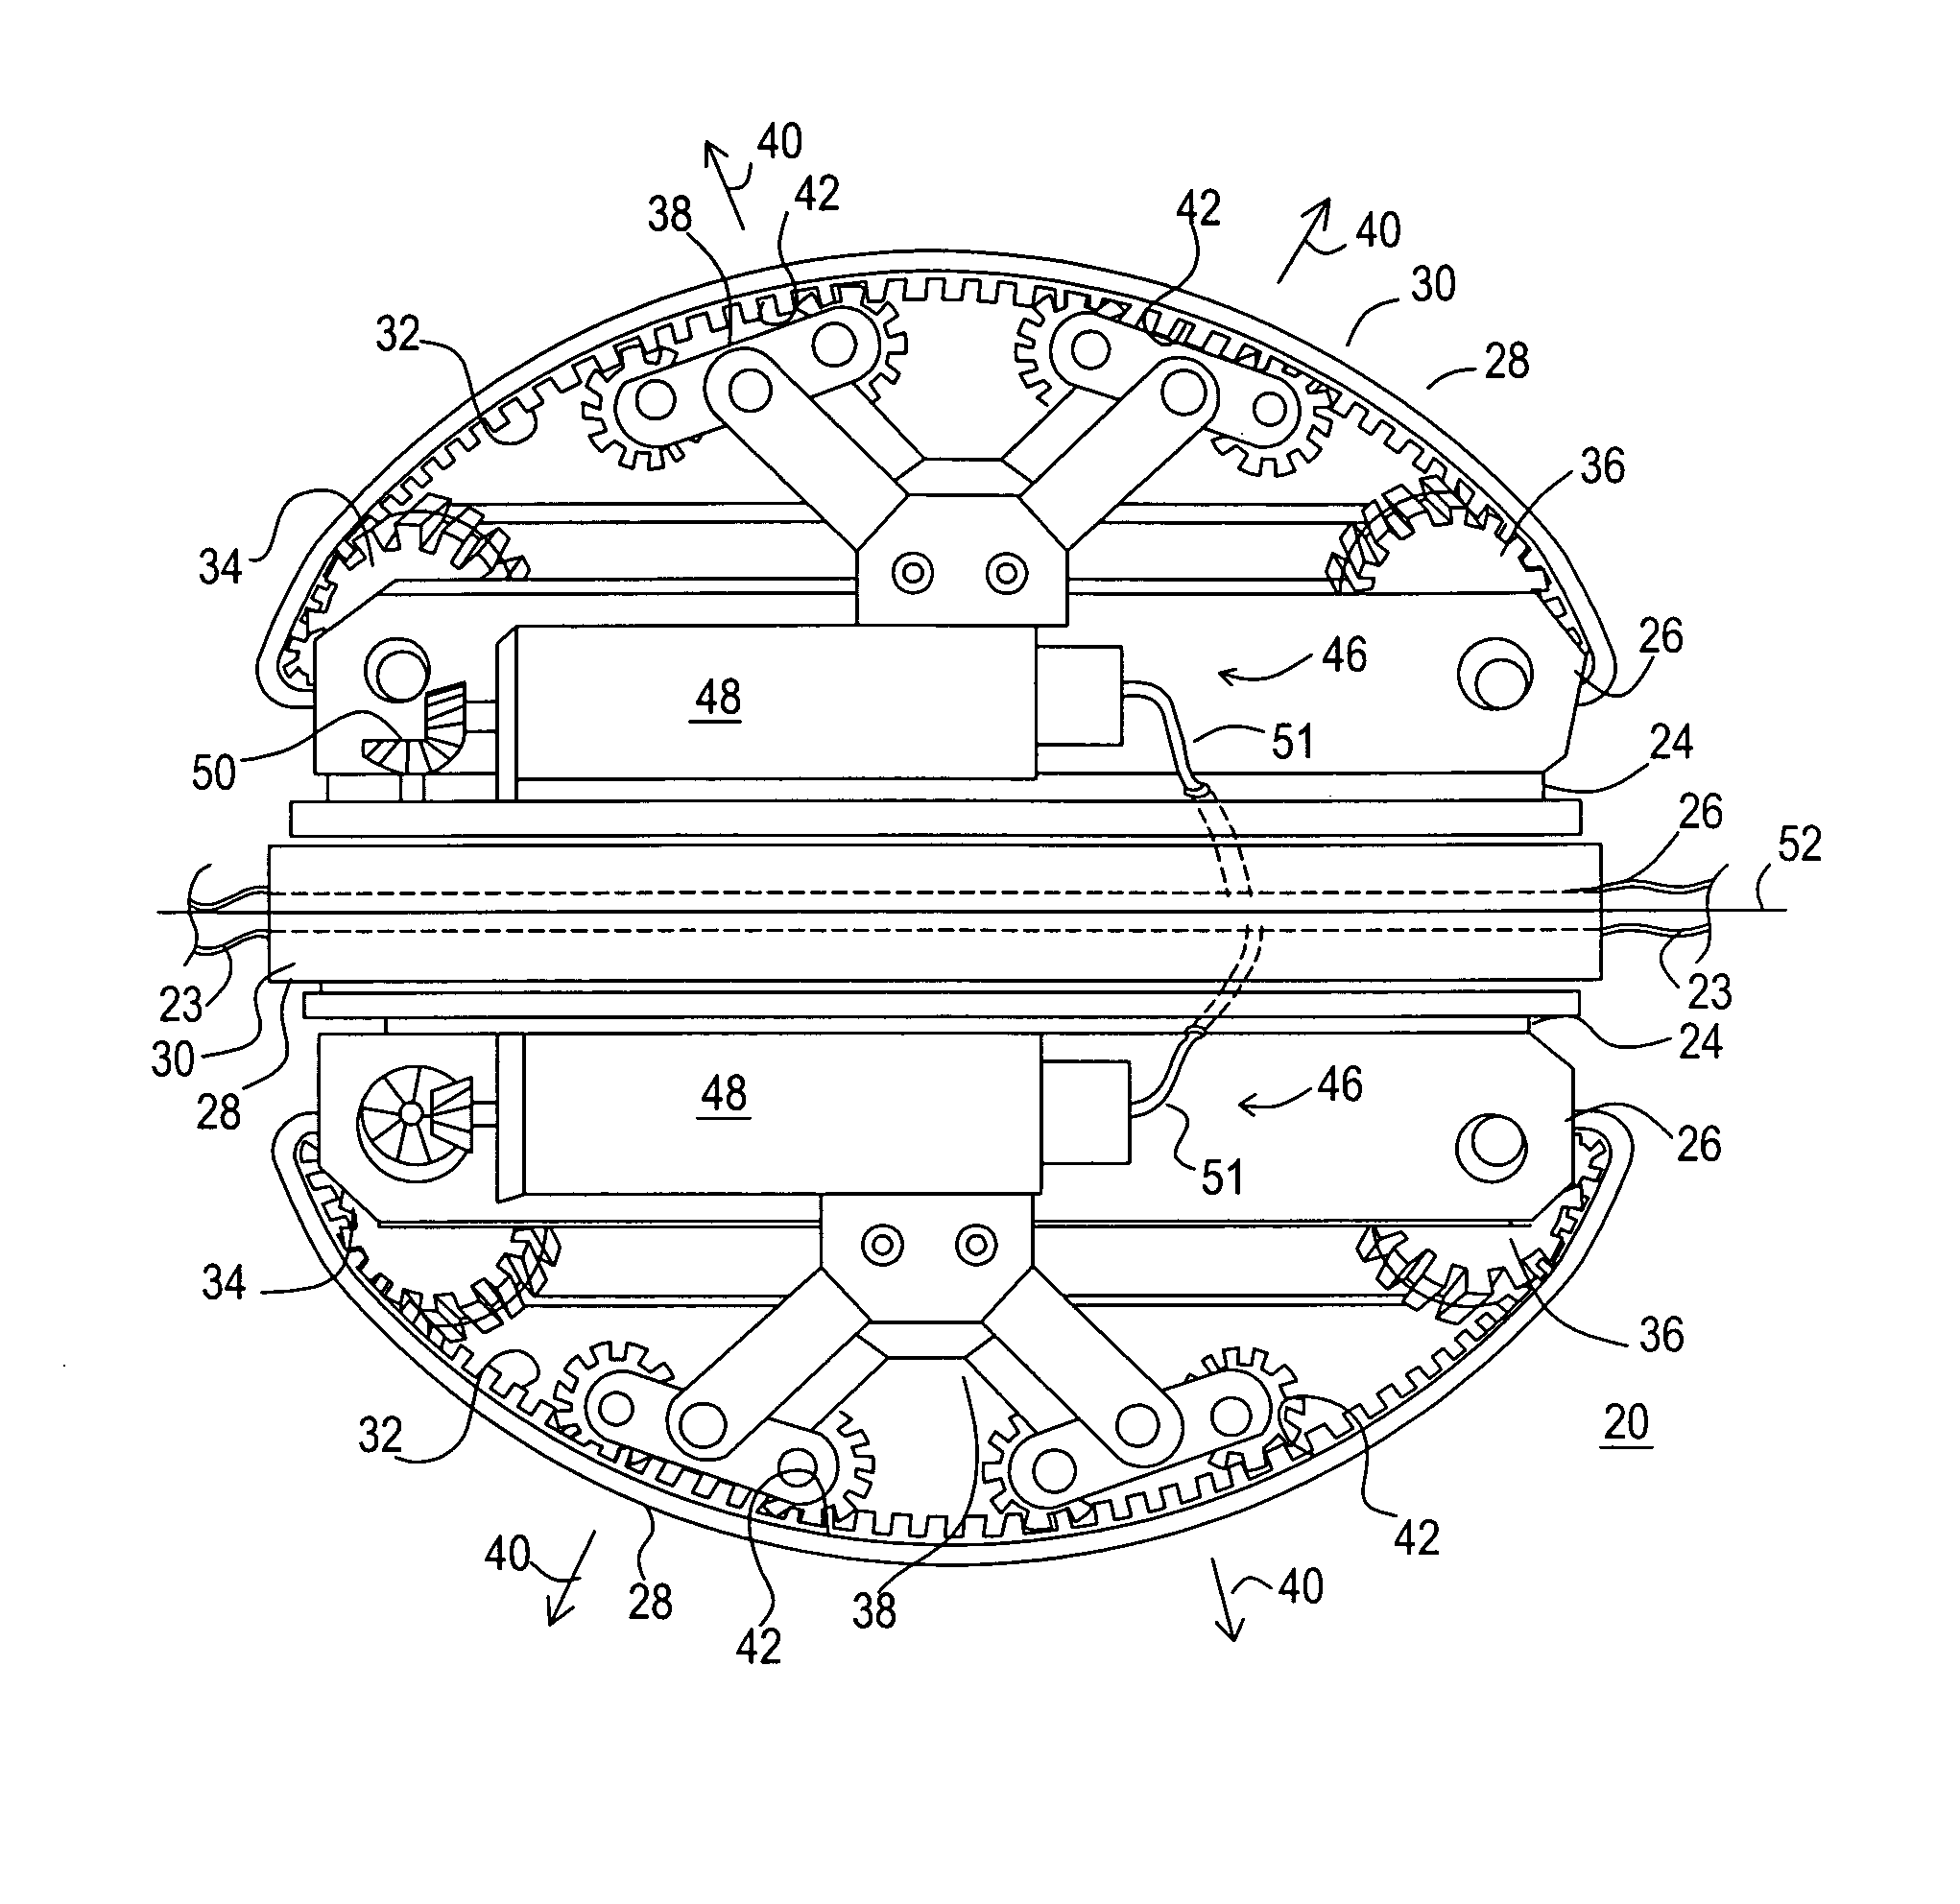 Self-propelled vehicle for movement within a tubular member